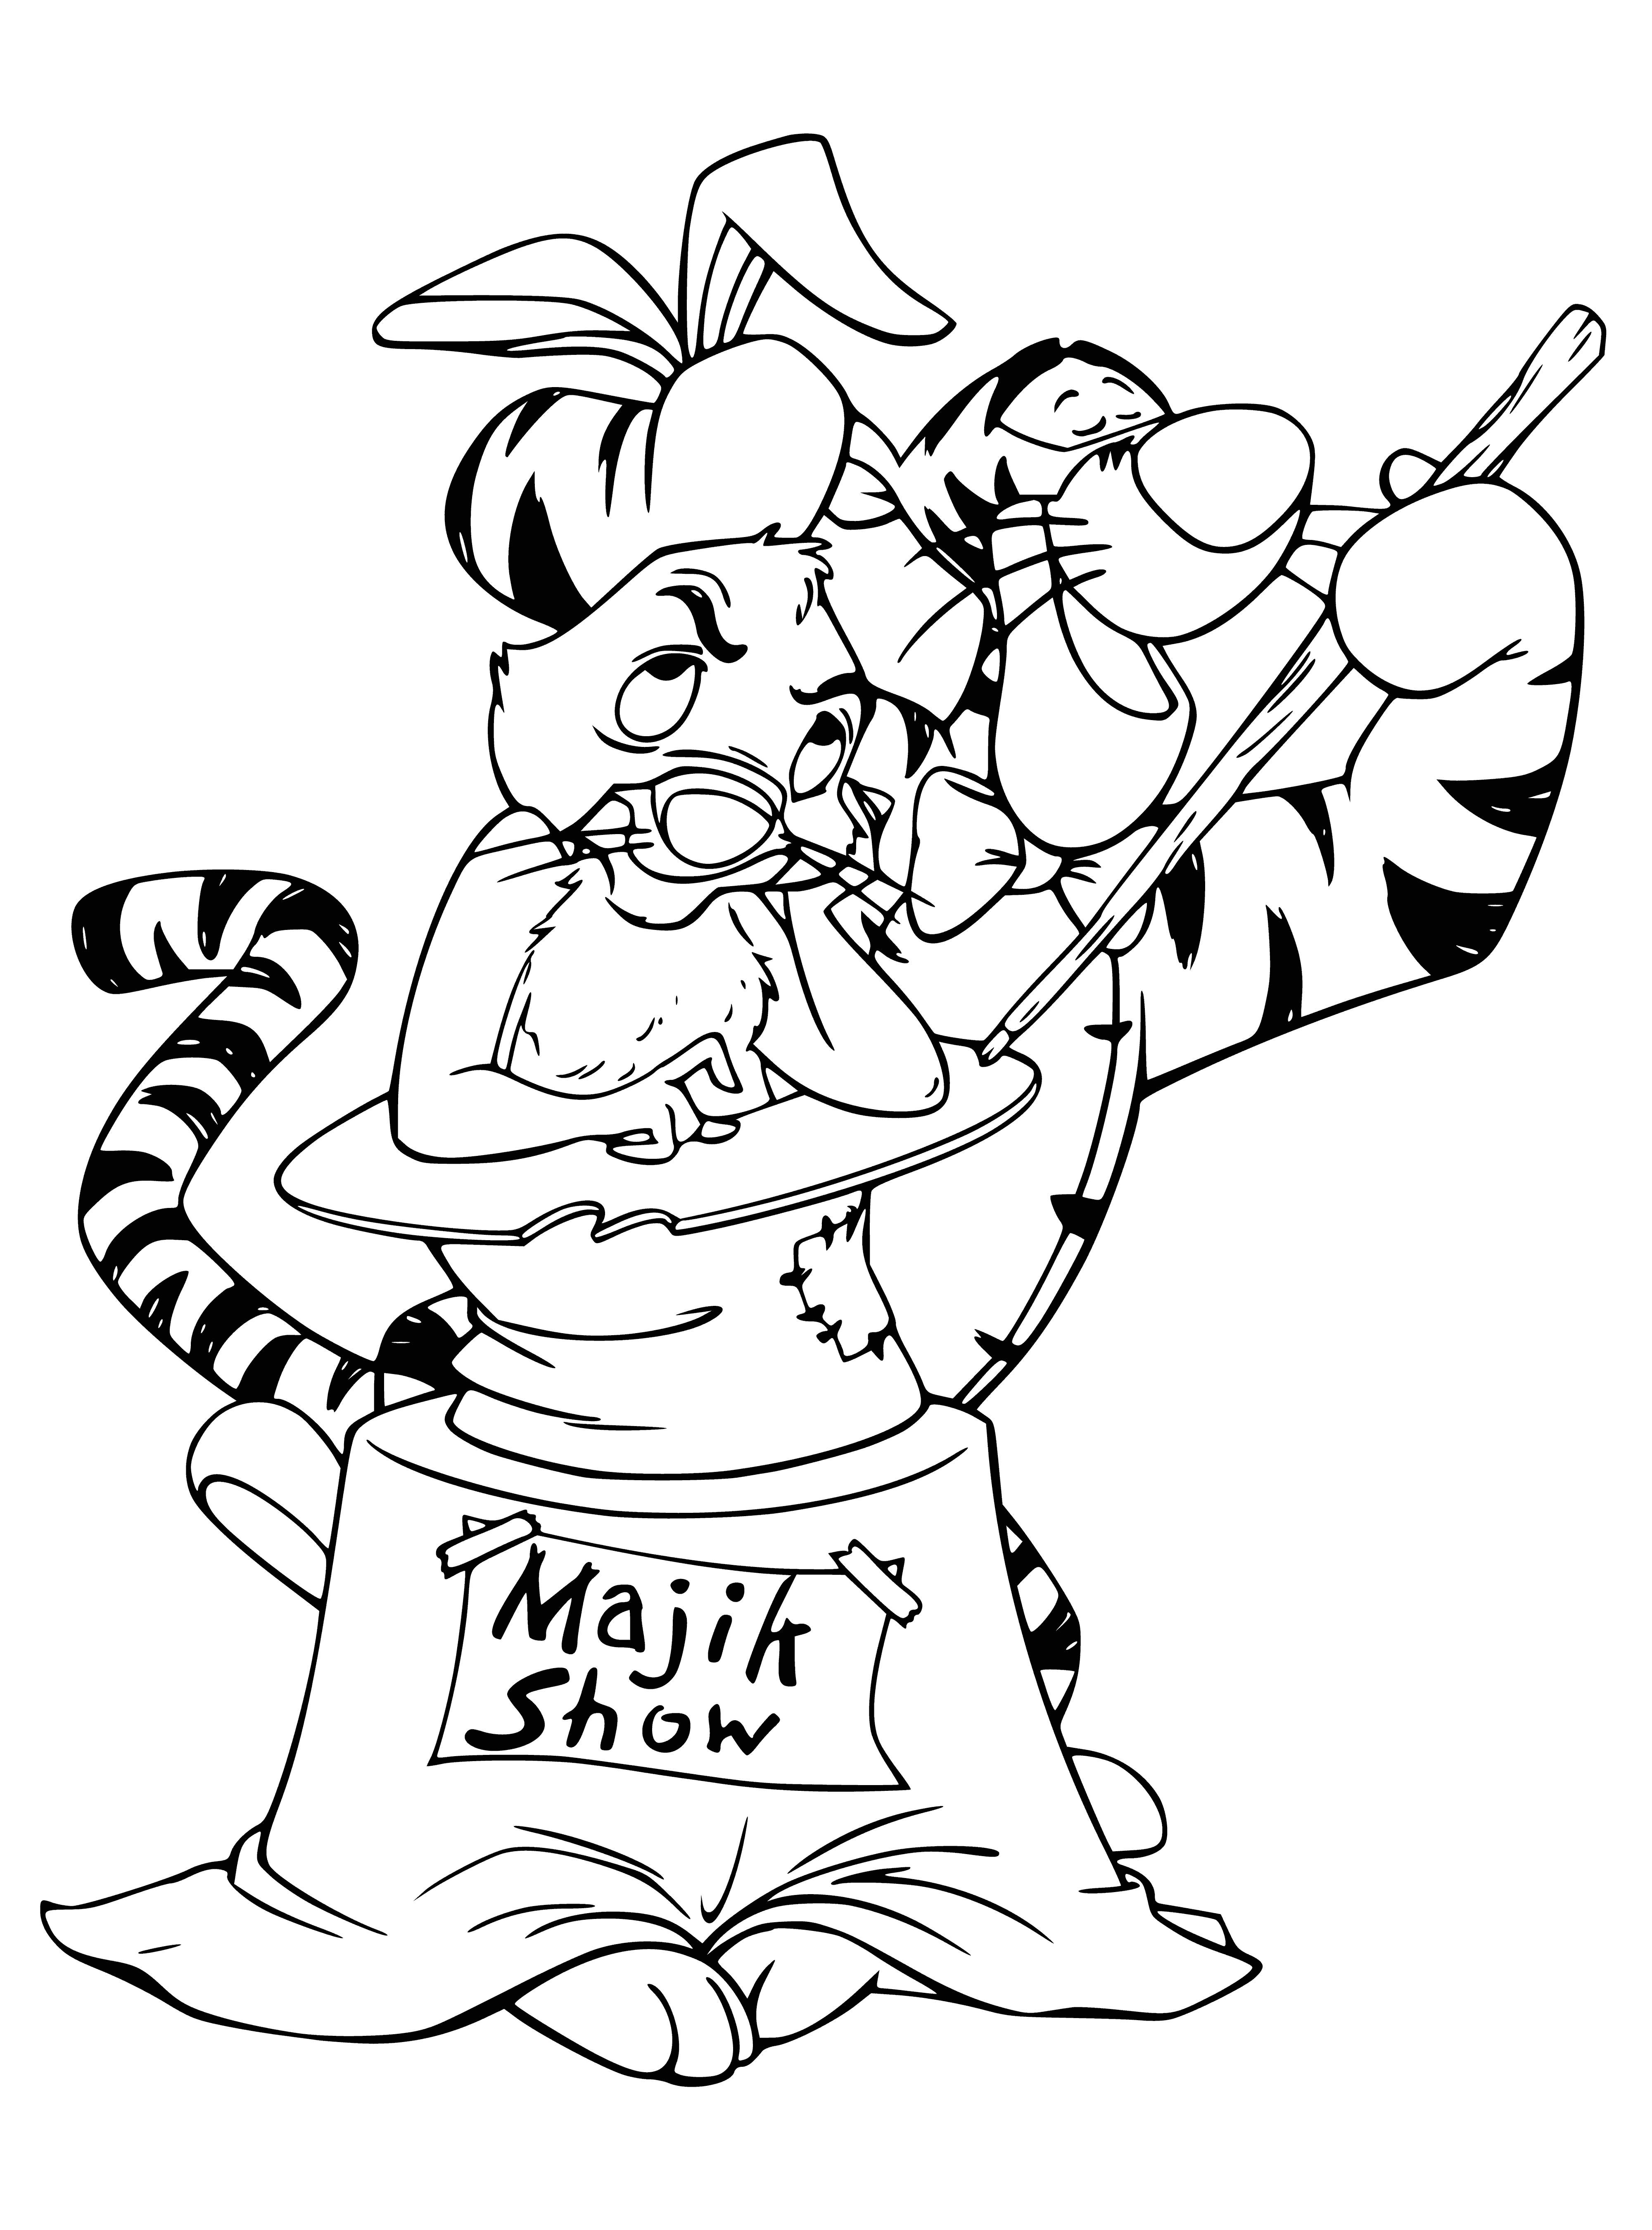 coloring page: Tiger magician in purple cape & top hat holds a wand & a scared rabbit in his left hand.